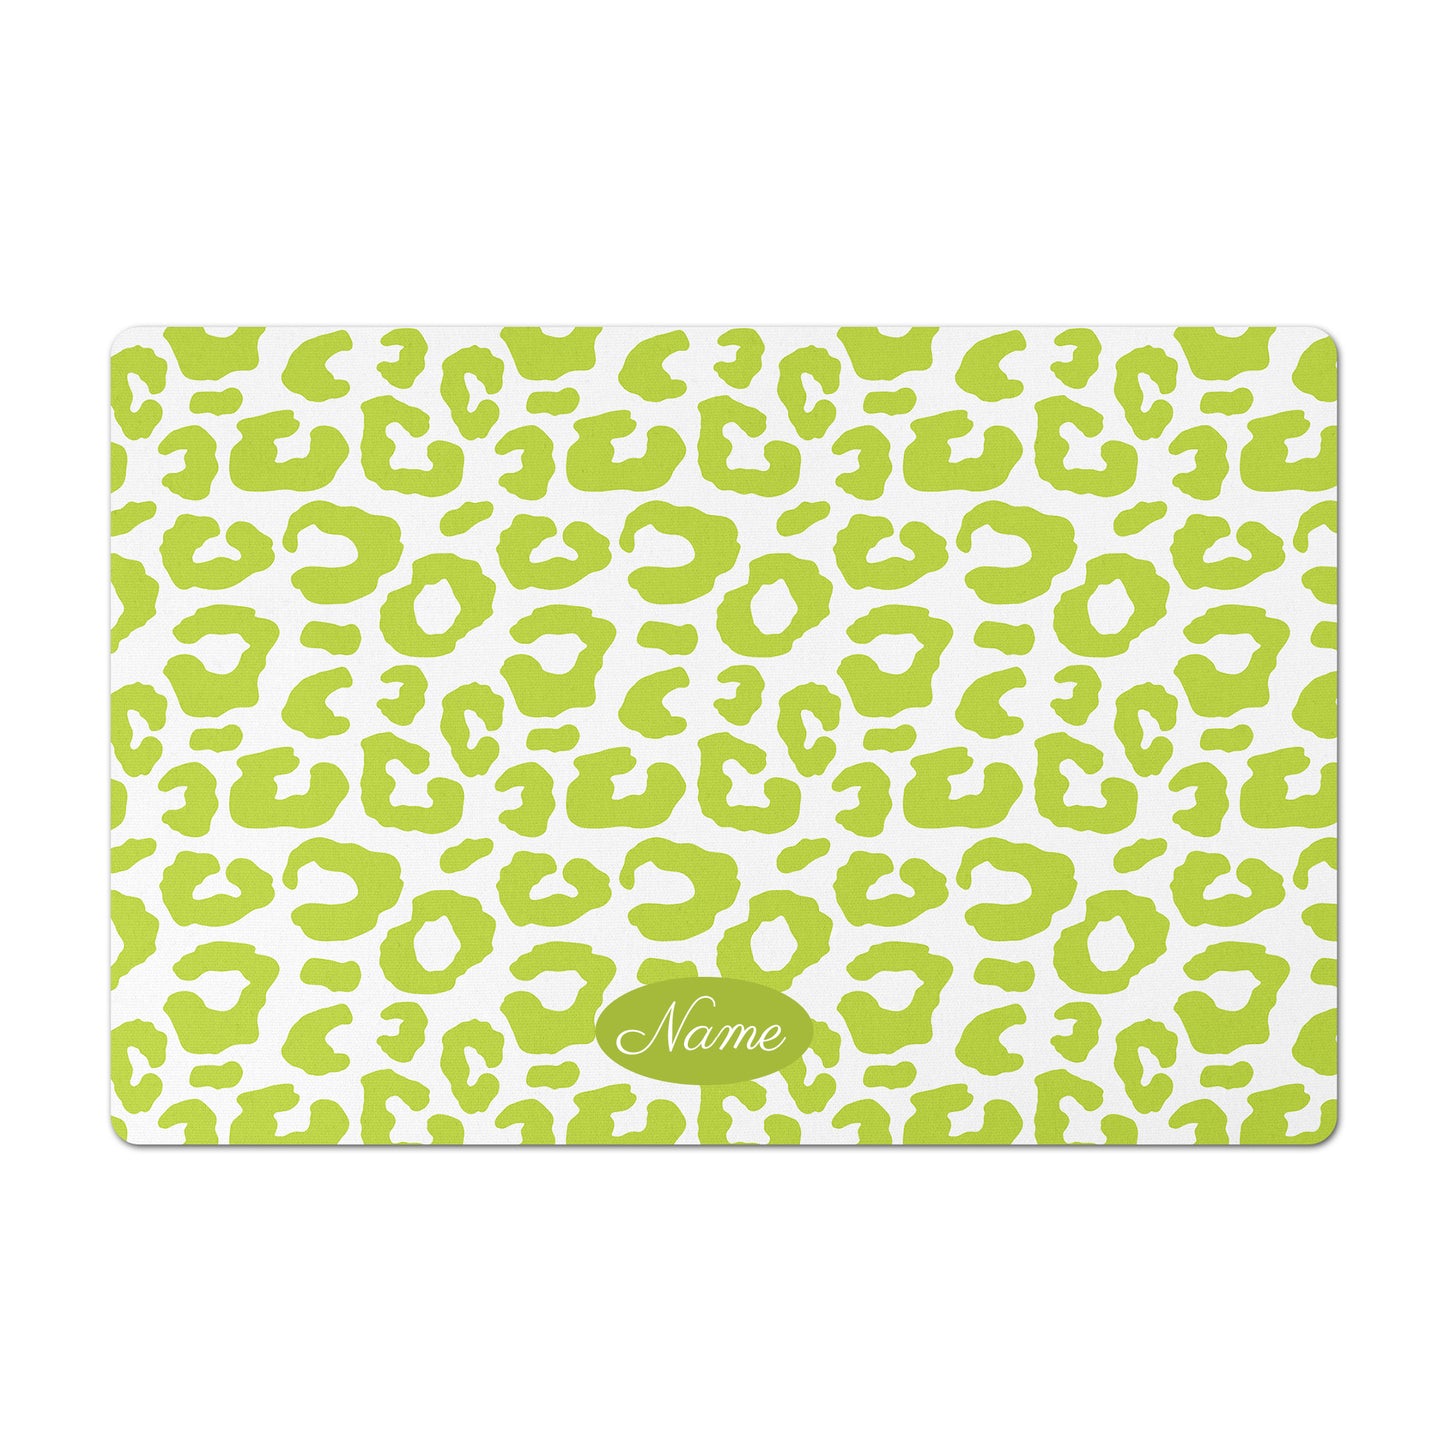 Personalized Leopard Pet Bowl Mat, Leaf Green and White